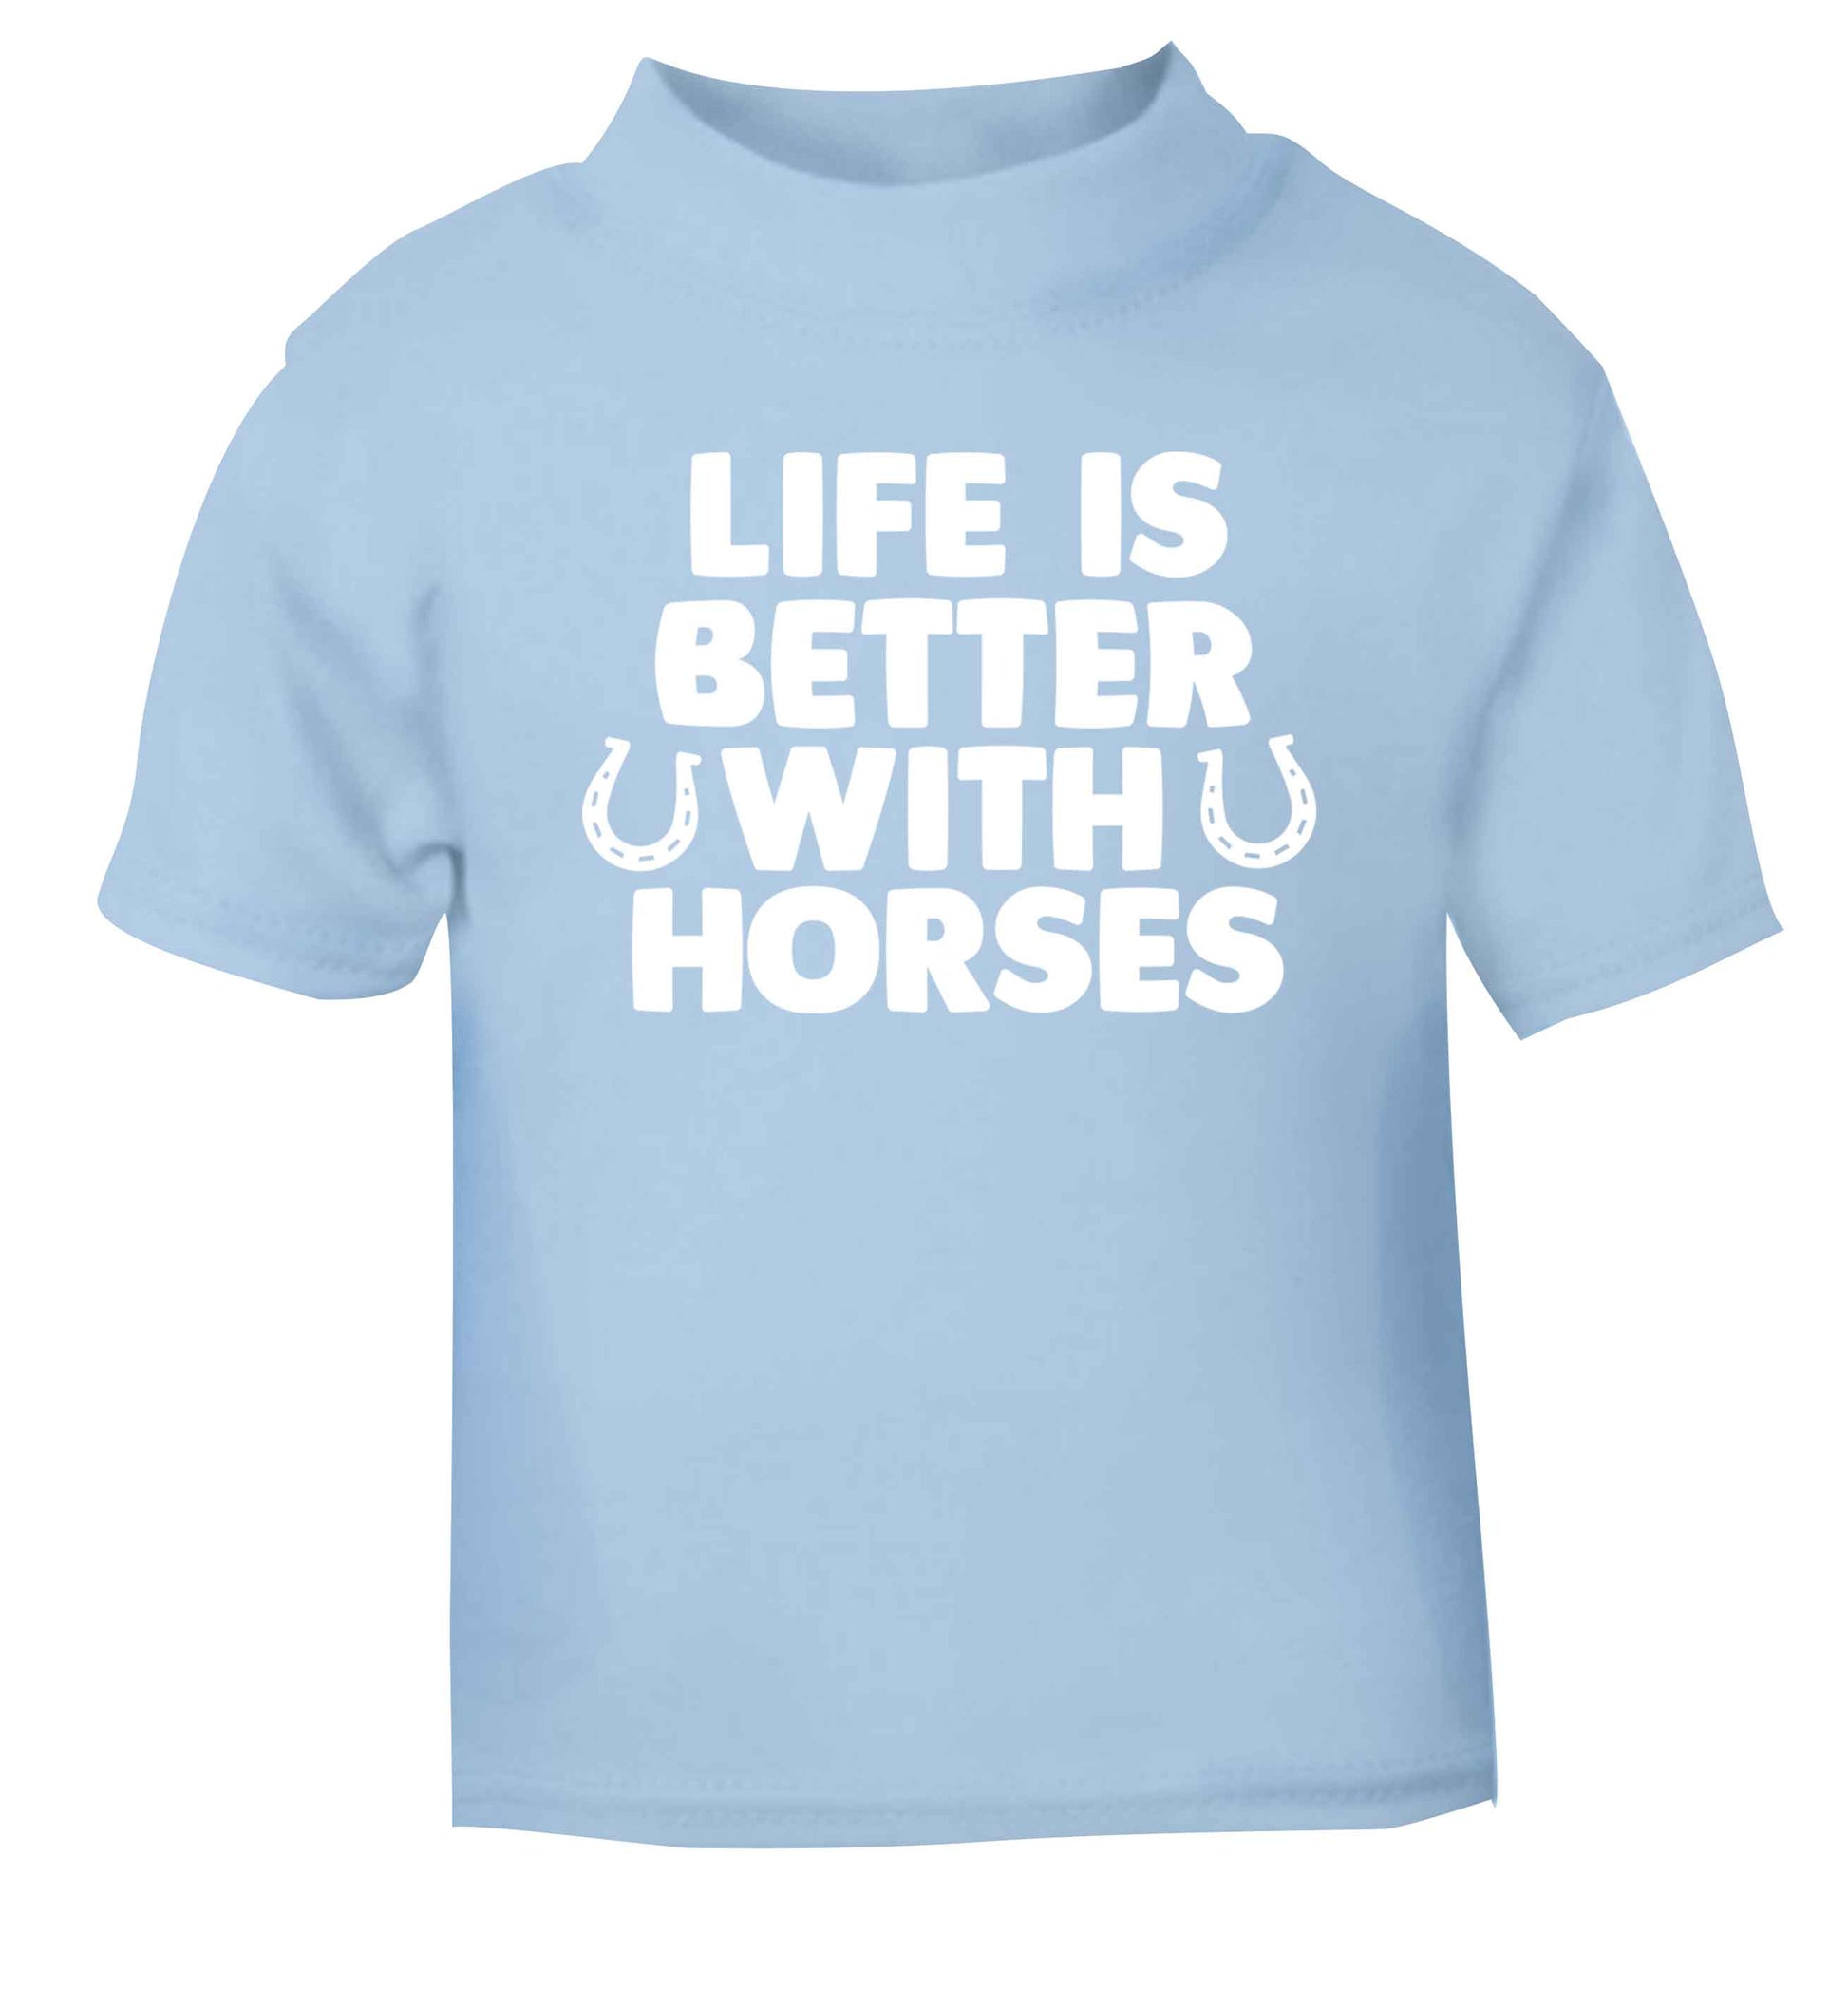 Life is better with horses light blue baby toddler Tshirt 2 Years